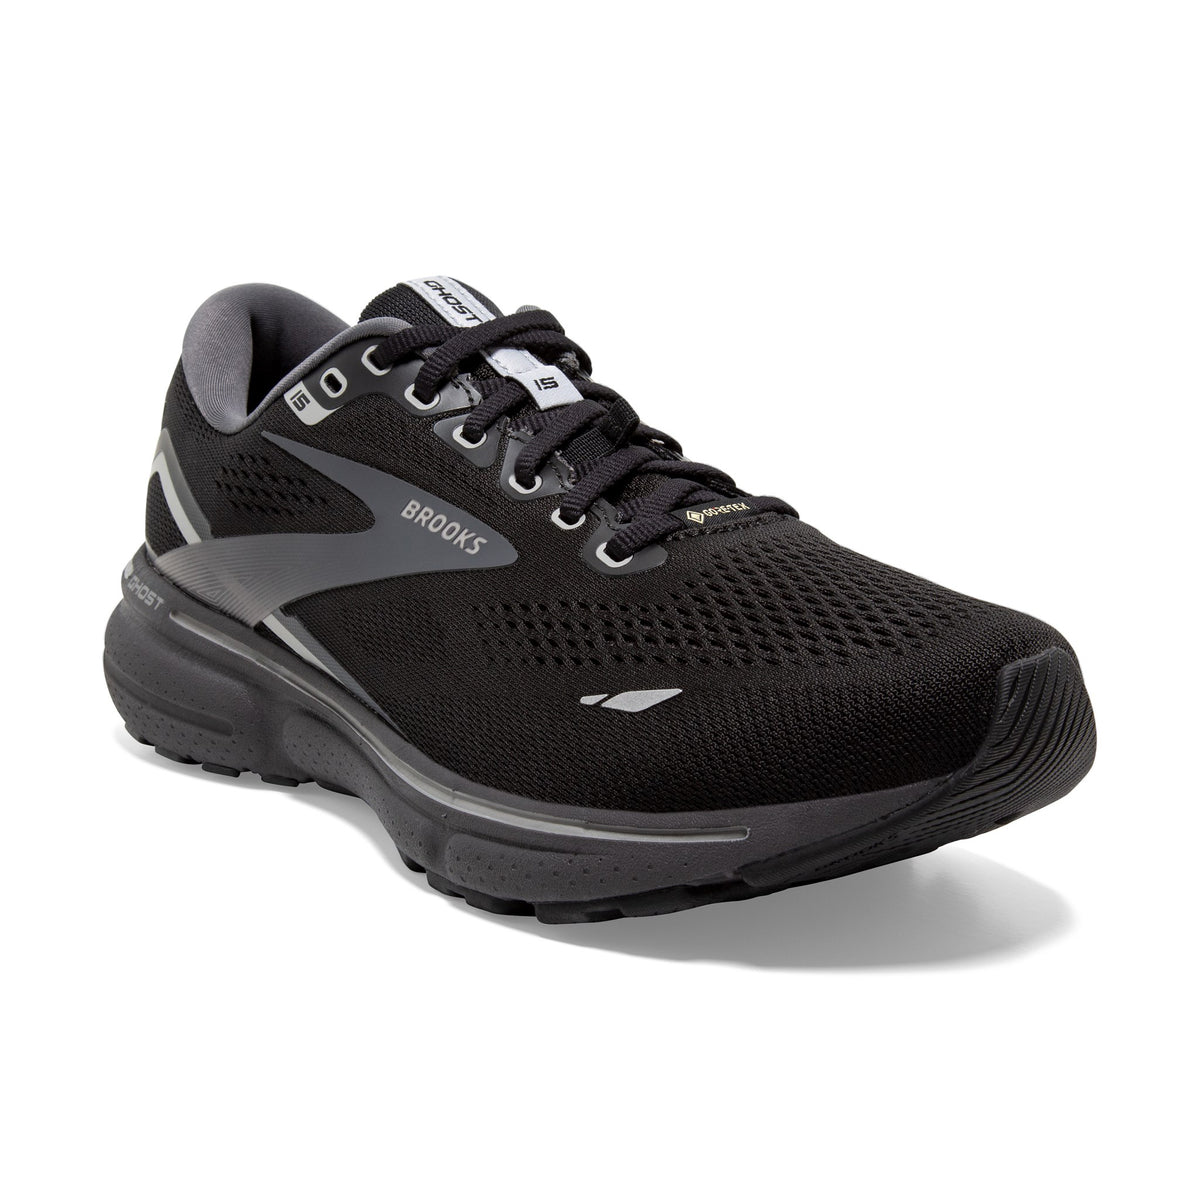 Brooks Ghost 15 GTX Mens Trail Shoes: Black/Pearl/Alloy